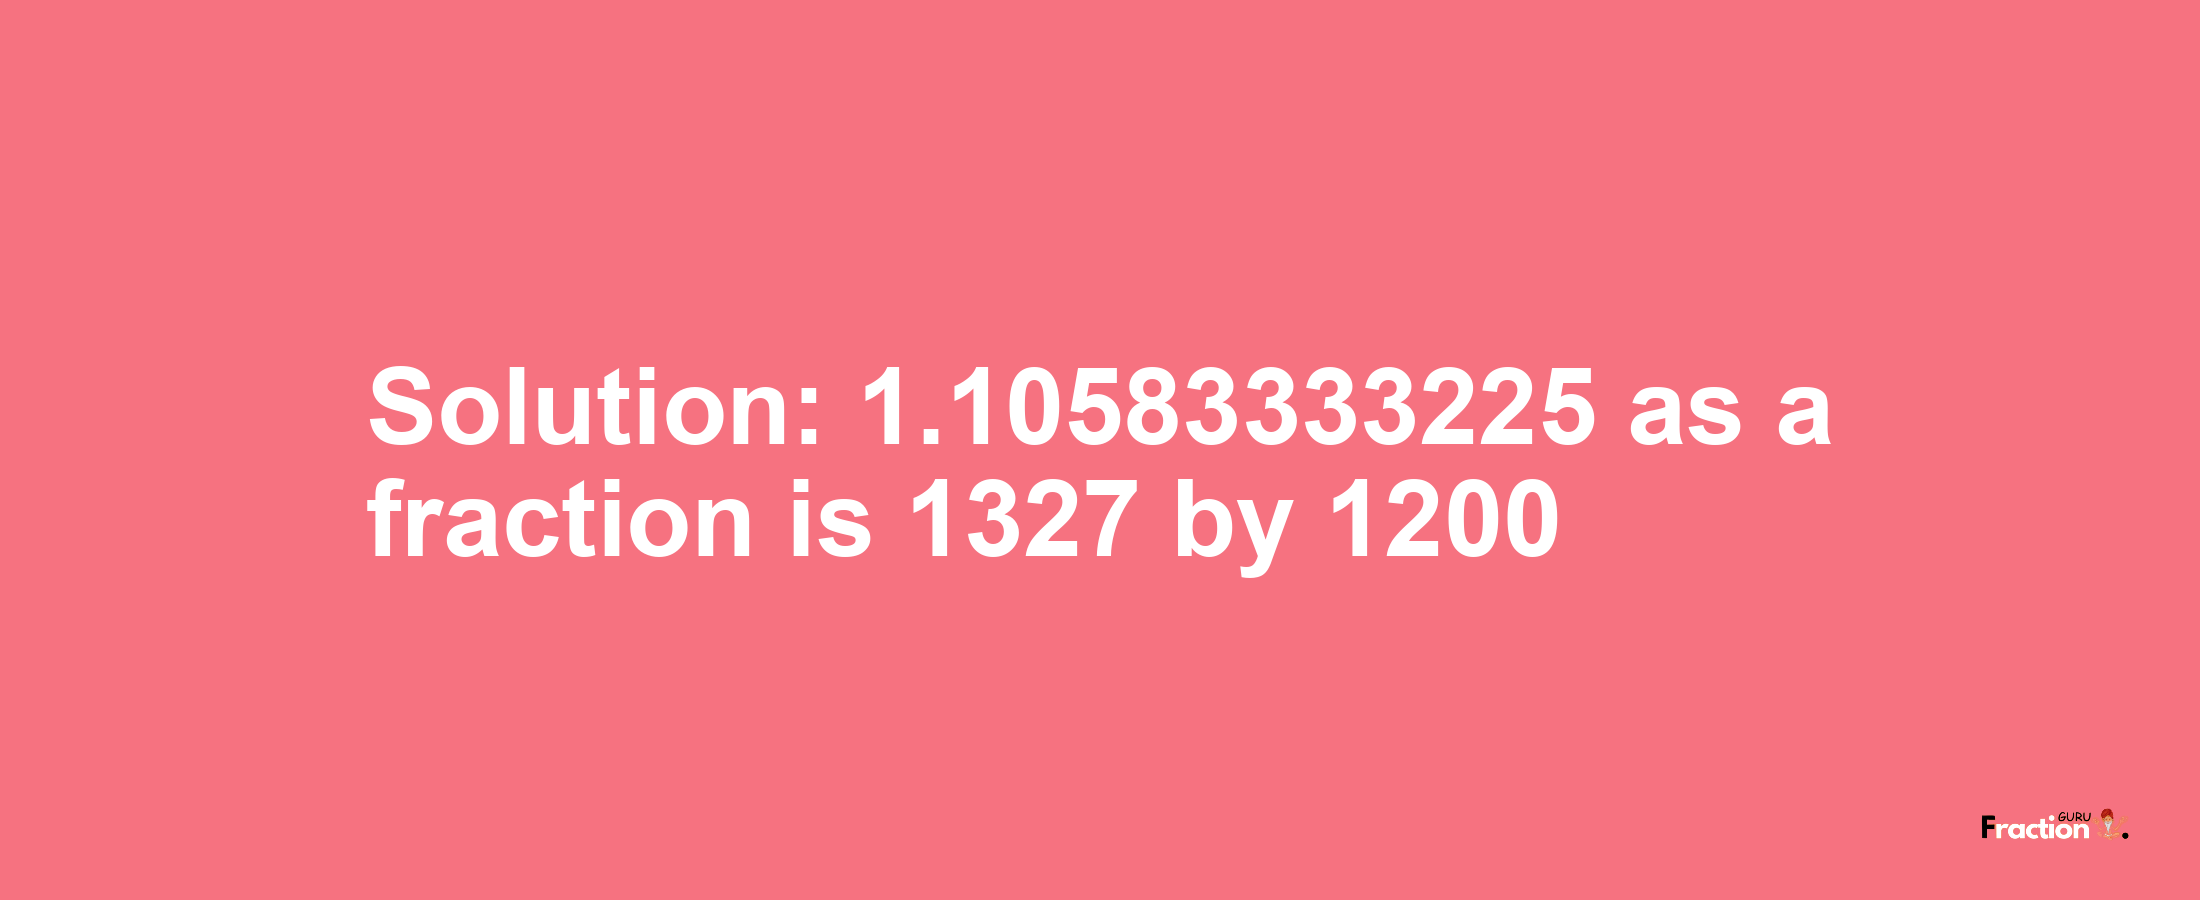 Solution:1.10583333225 as a fraction is 1327/1200